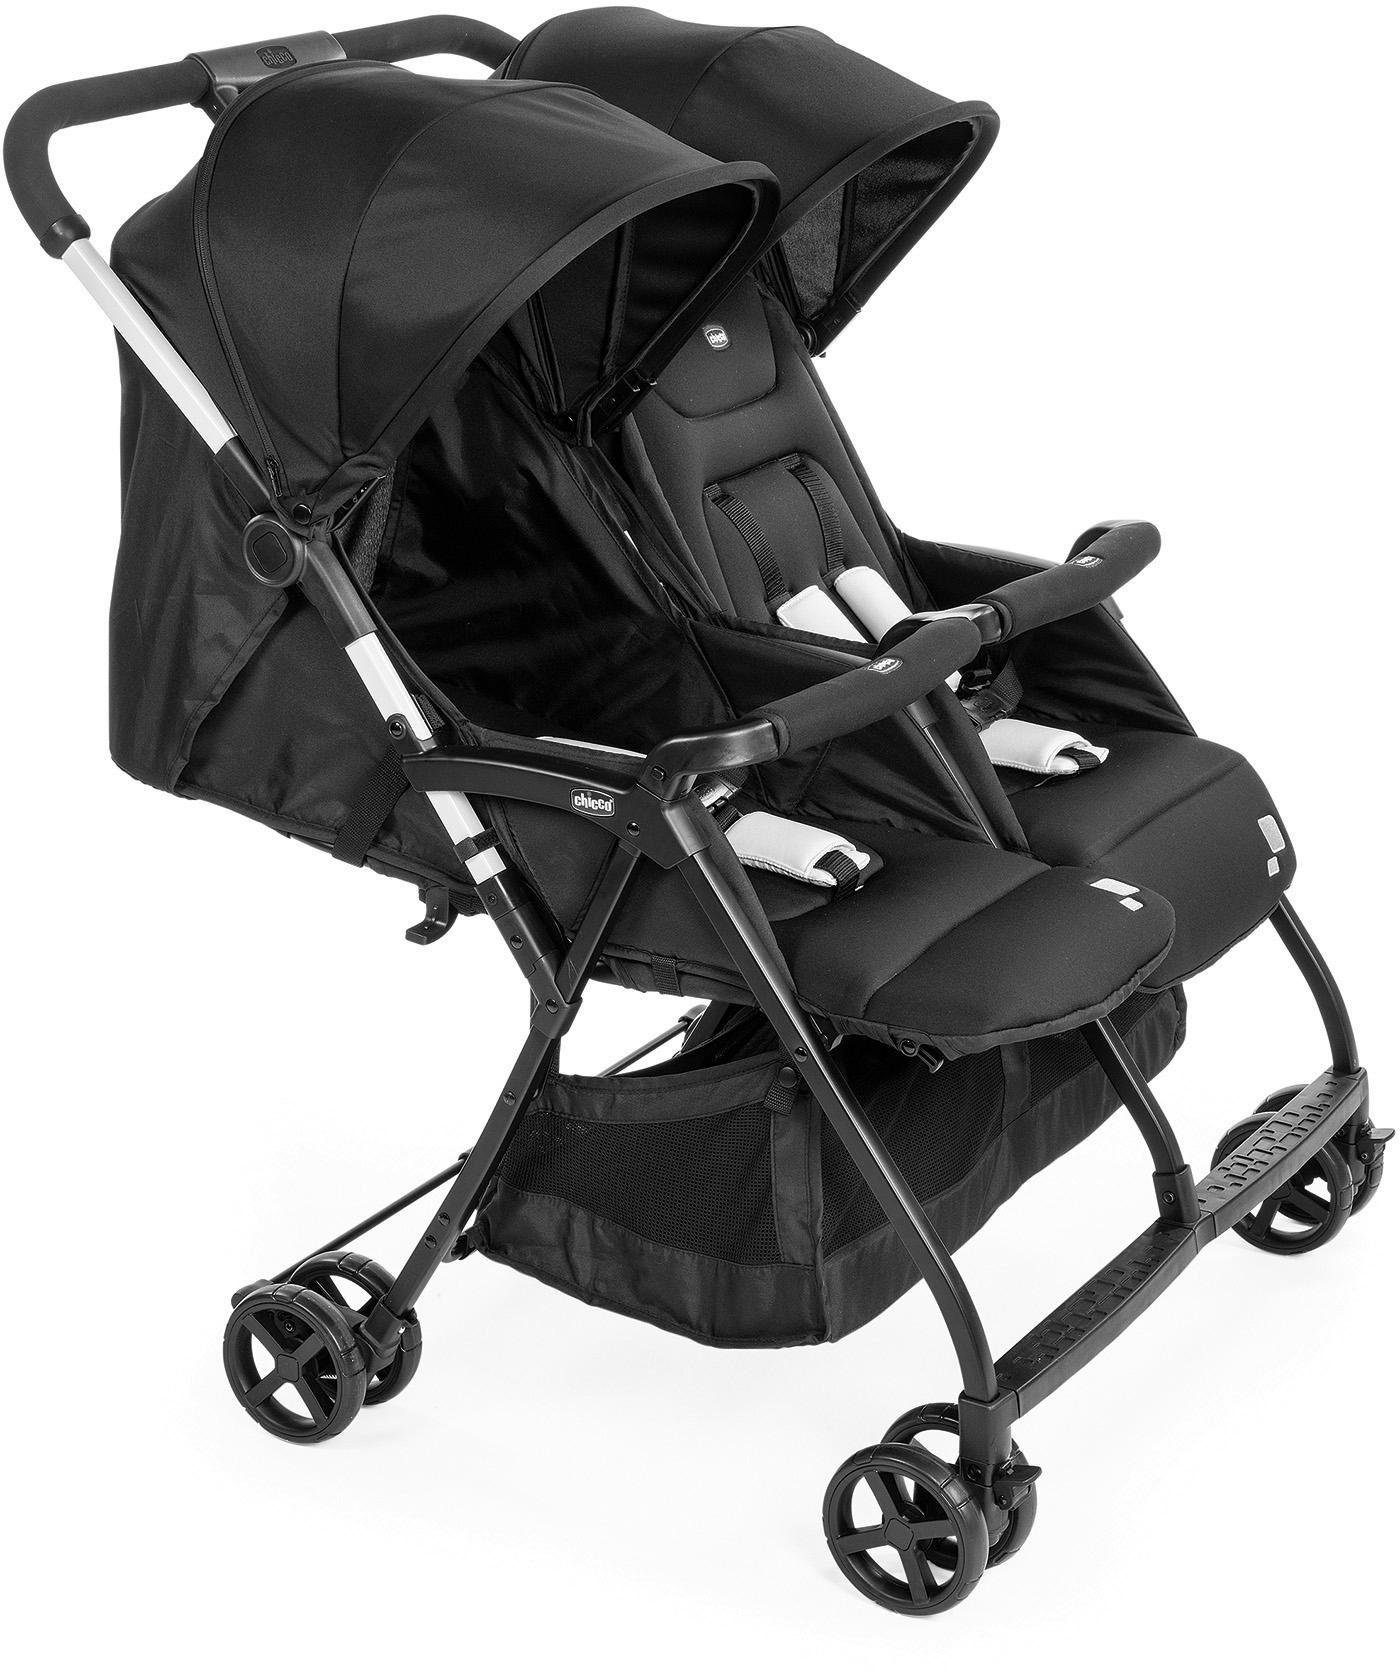 Chicco Zwillingsbuggy Zwillingskinderwagen Twin, Silver OHlalà Cat,